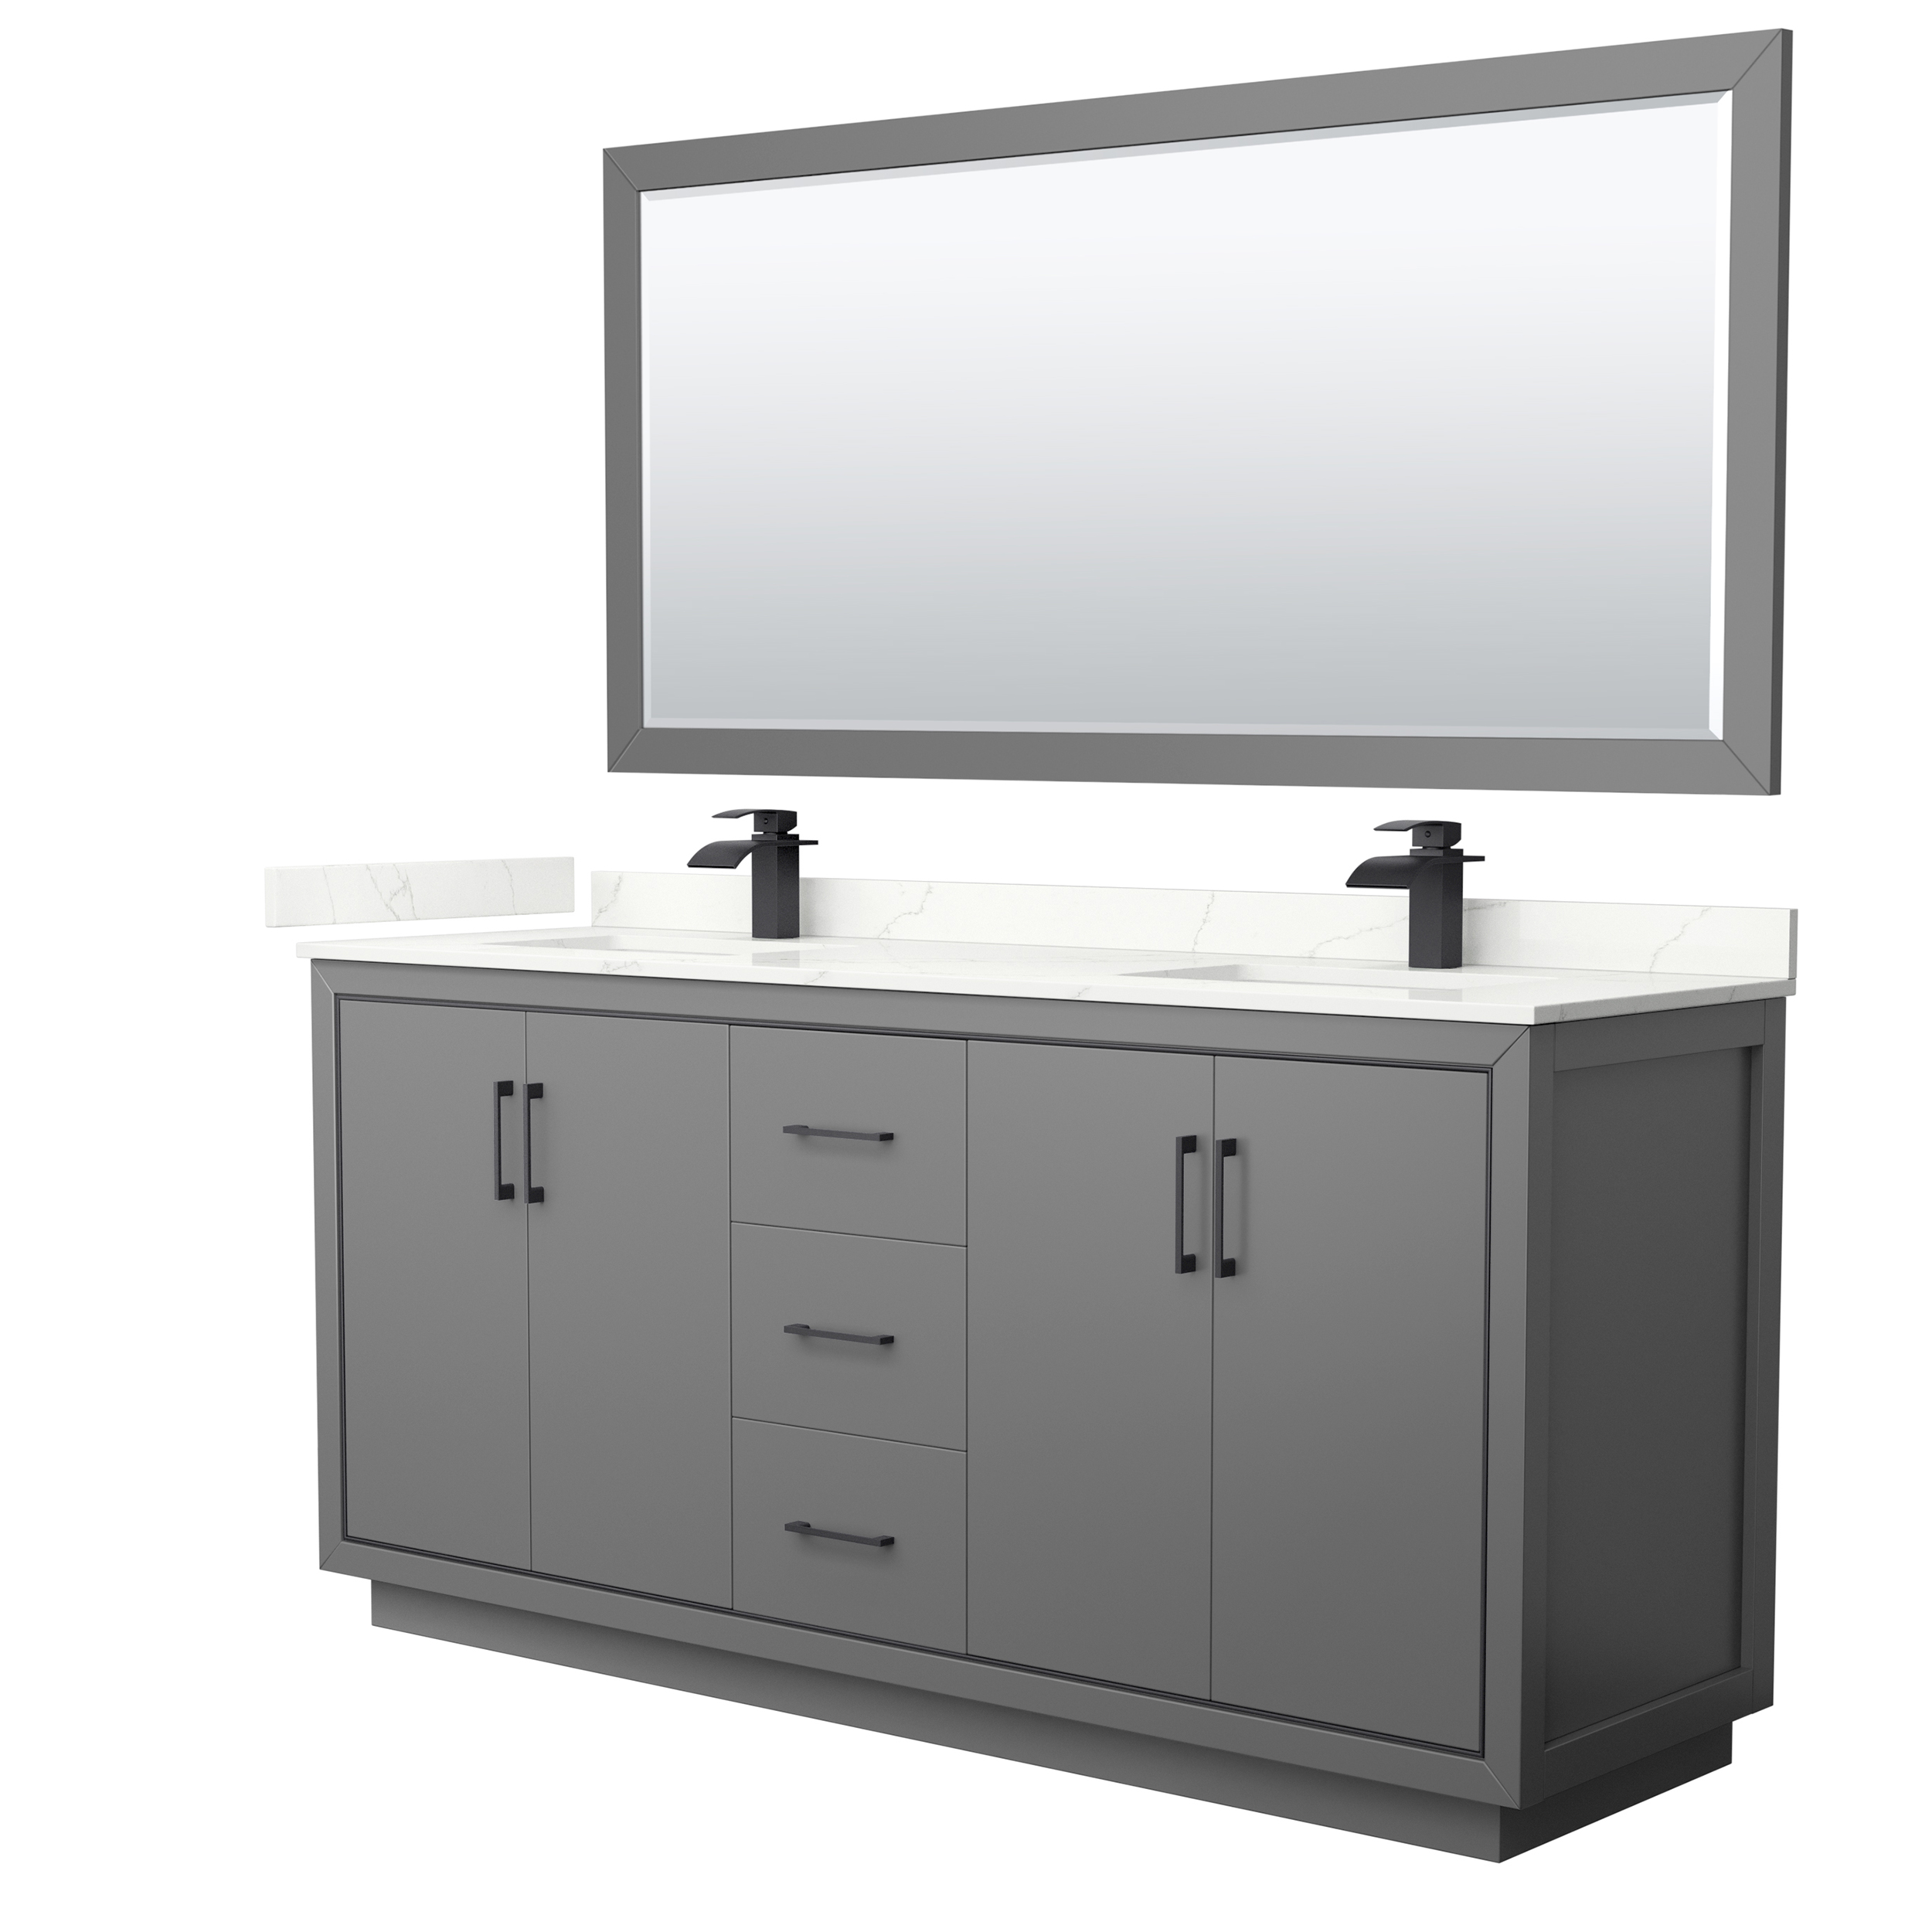 Icon 72" Double Vanity with optional Quartz or Carrara Marble Counter - Dark Gray WC-1111-72-DBL-VAN-DKG_